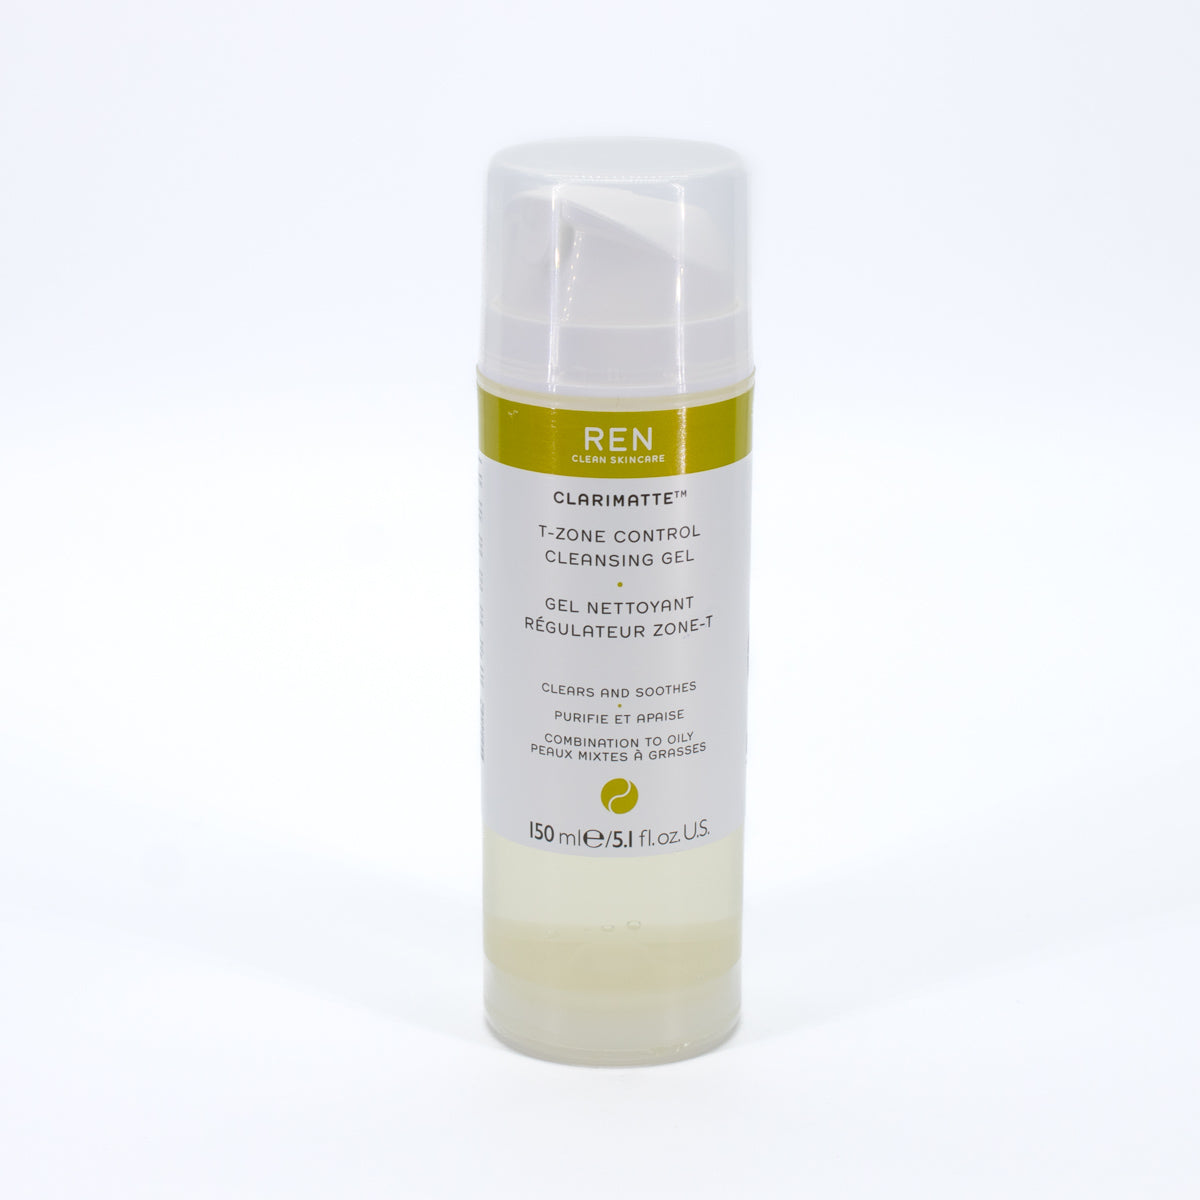 REN Clean Skincare Clarimatte T-Zone Control Cleansing Gel 5.1oz - Imperfect Container